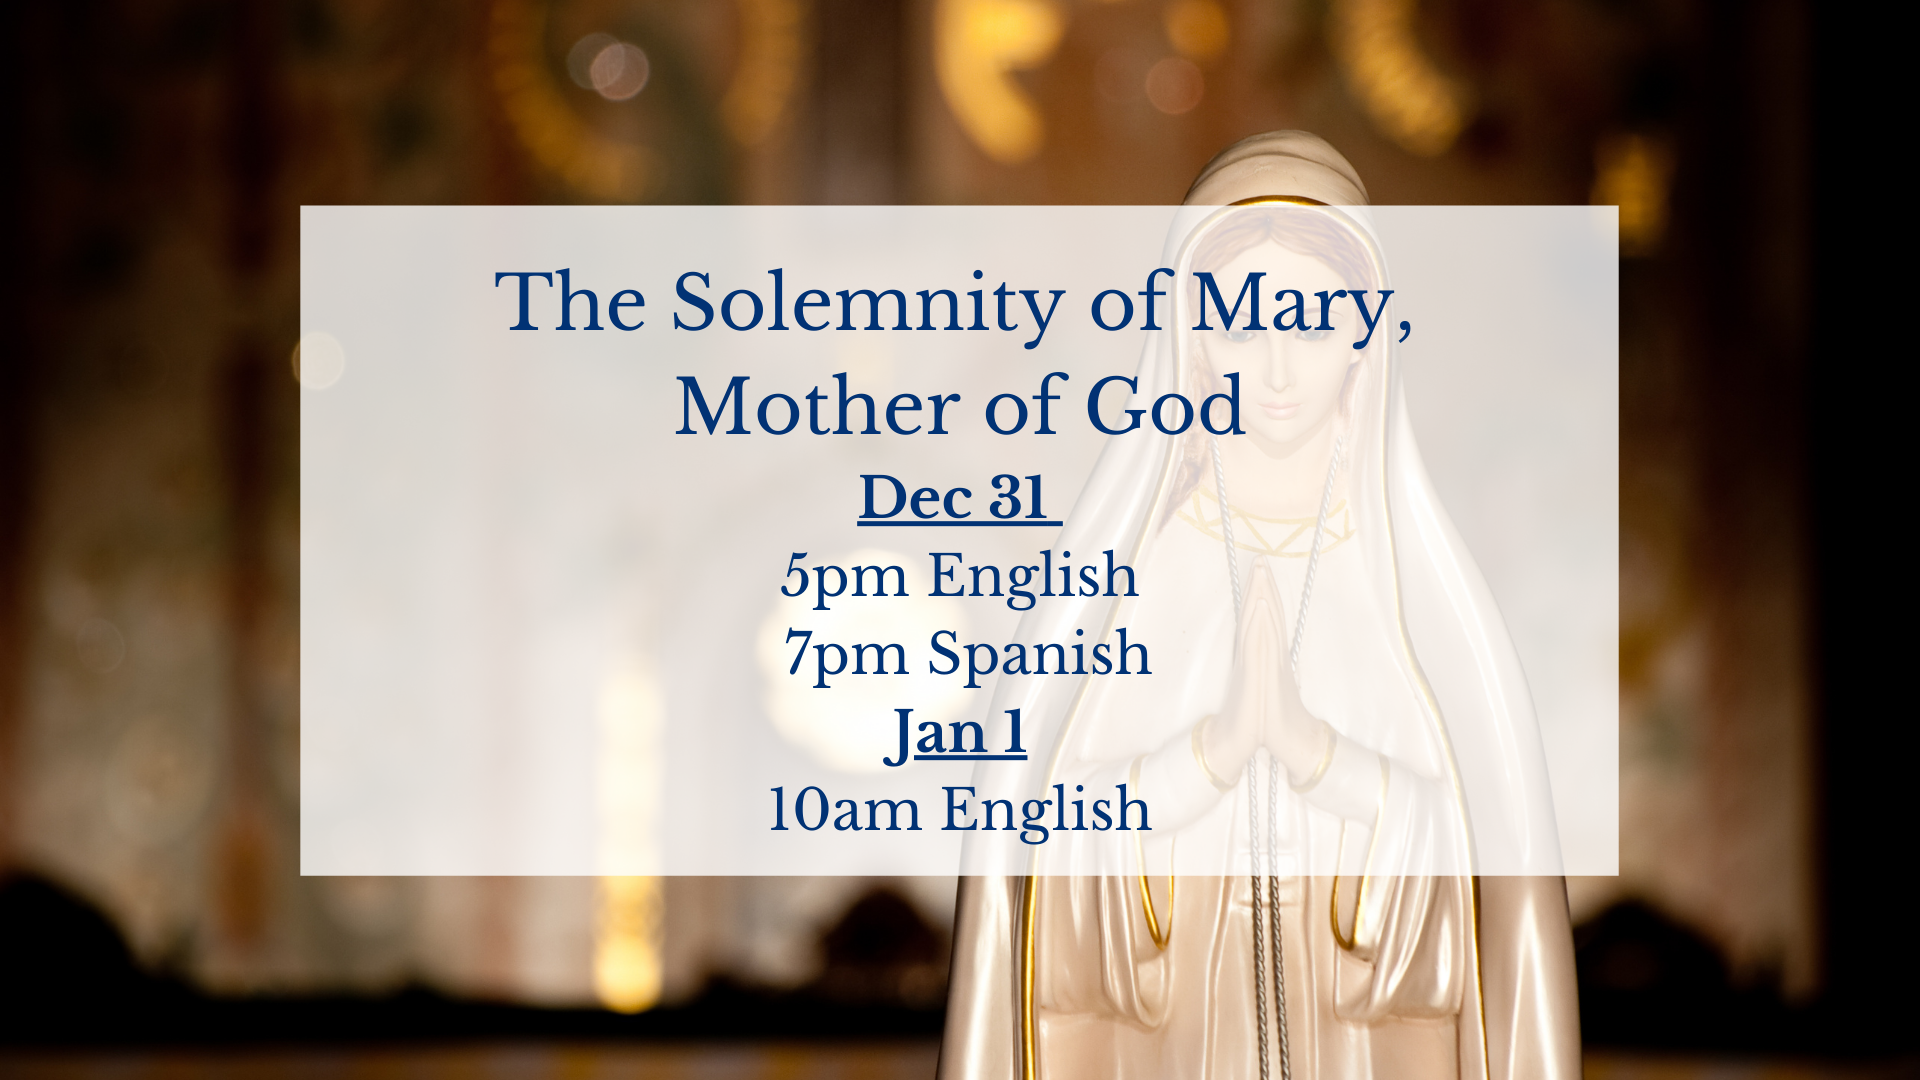 Mass Times for Mary, Mother of God Feast Day